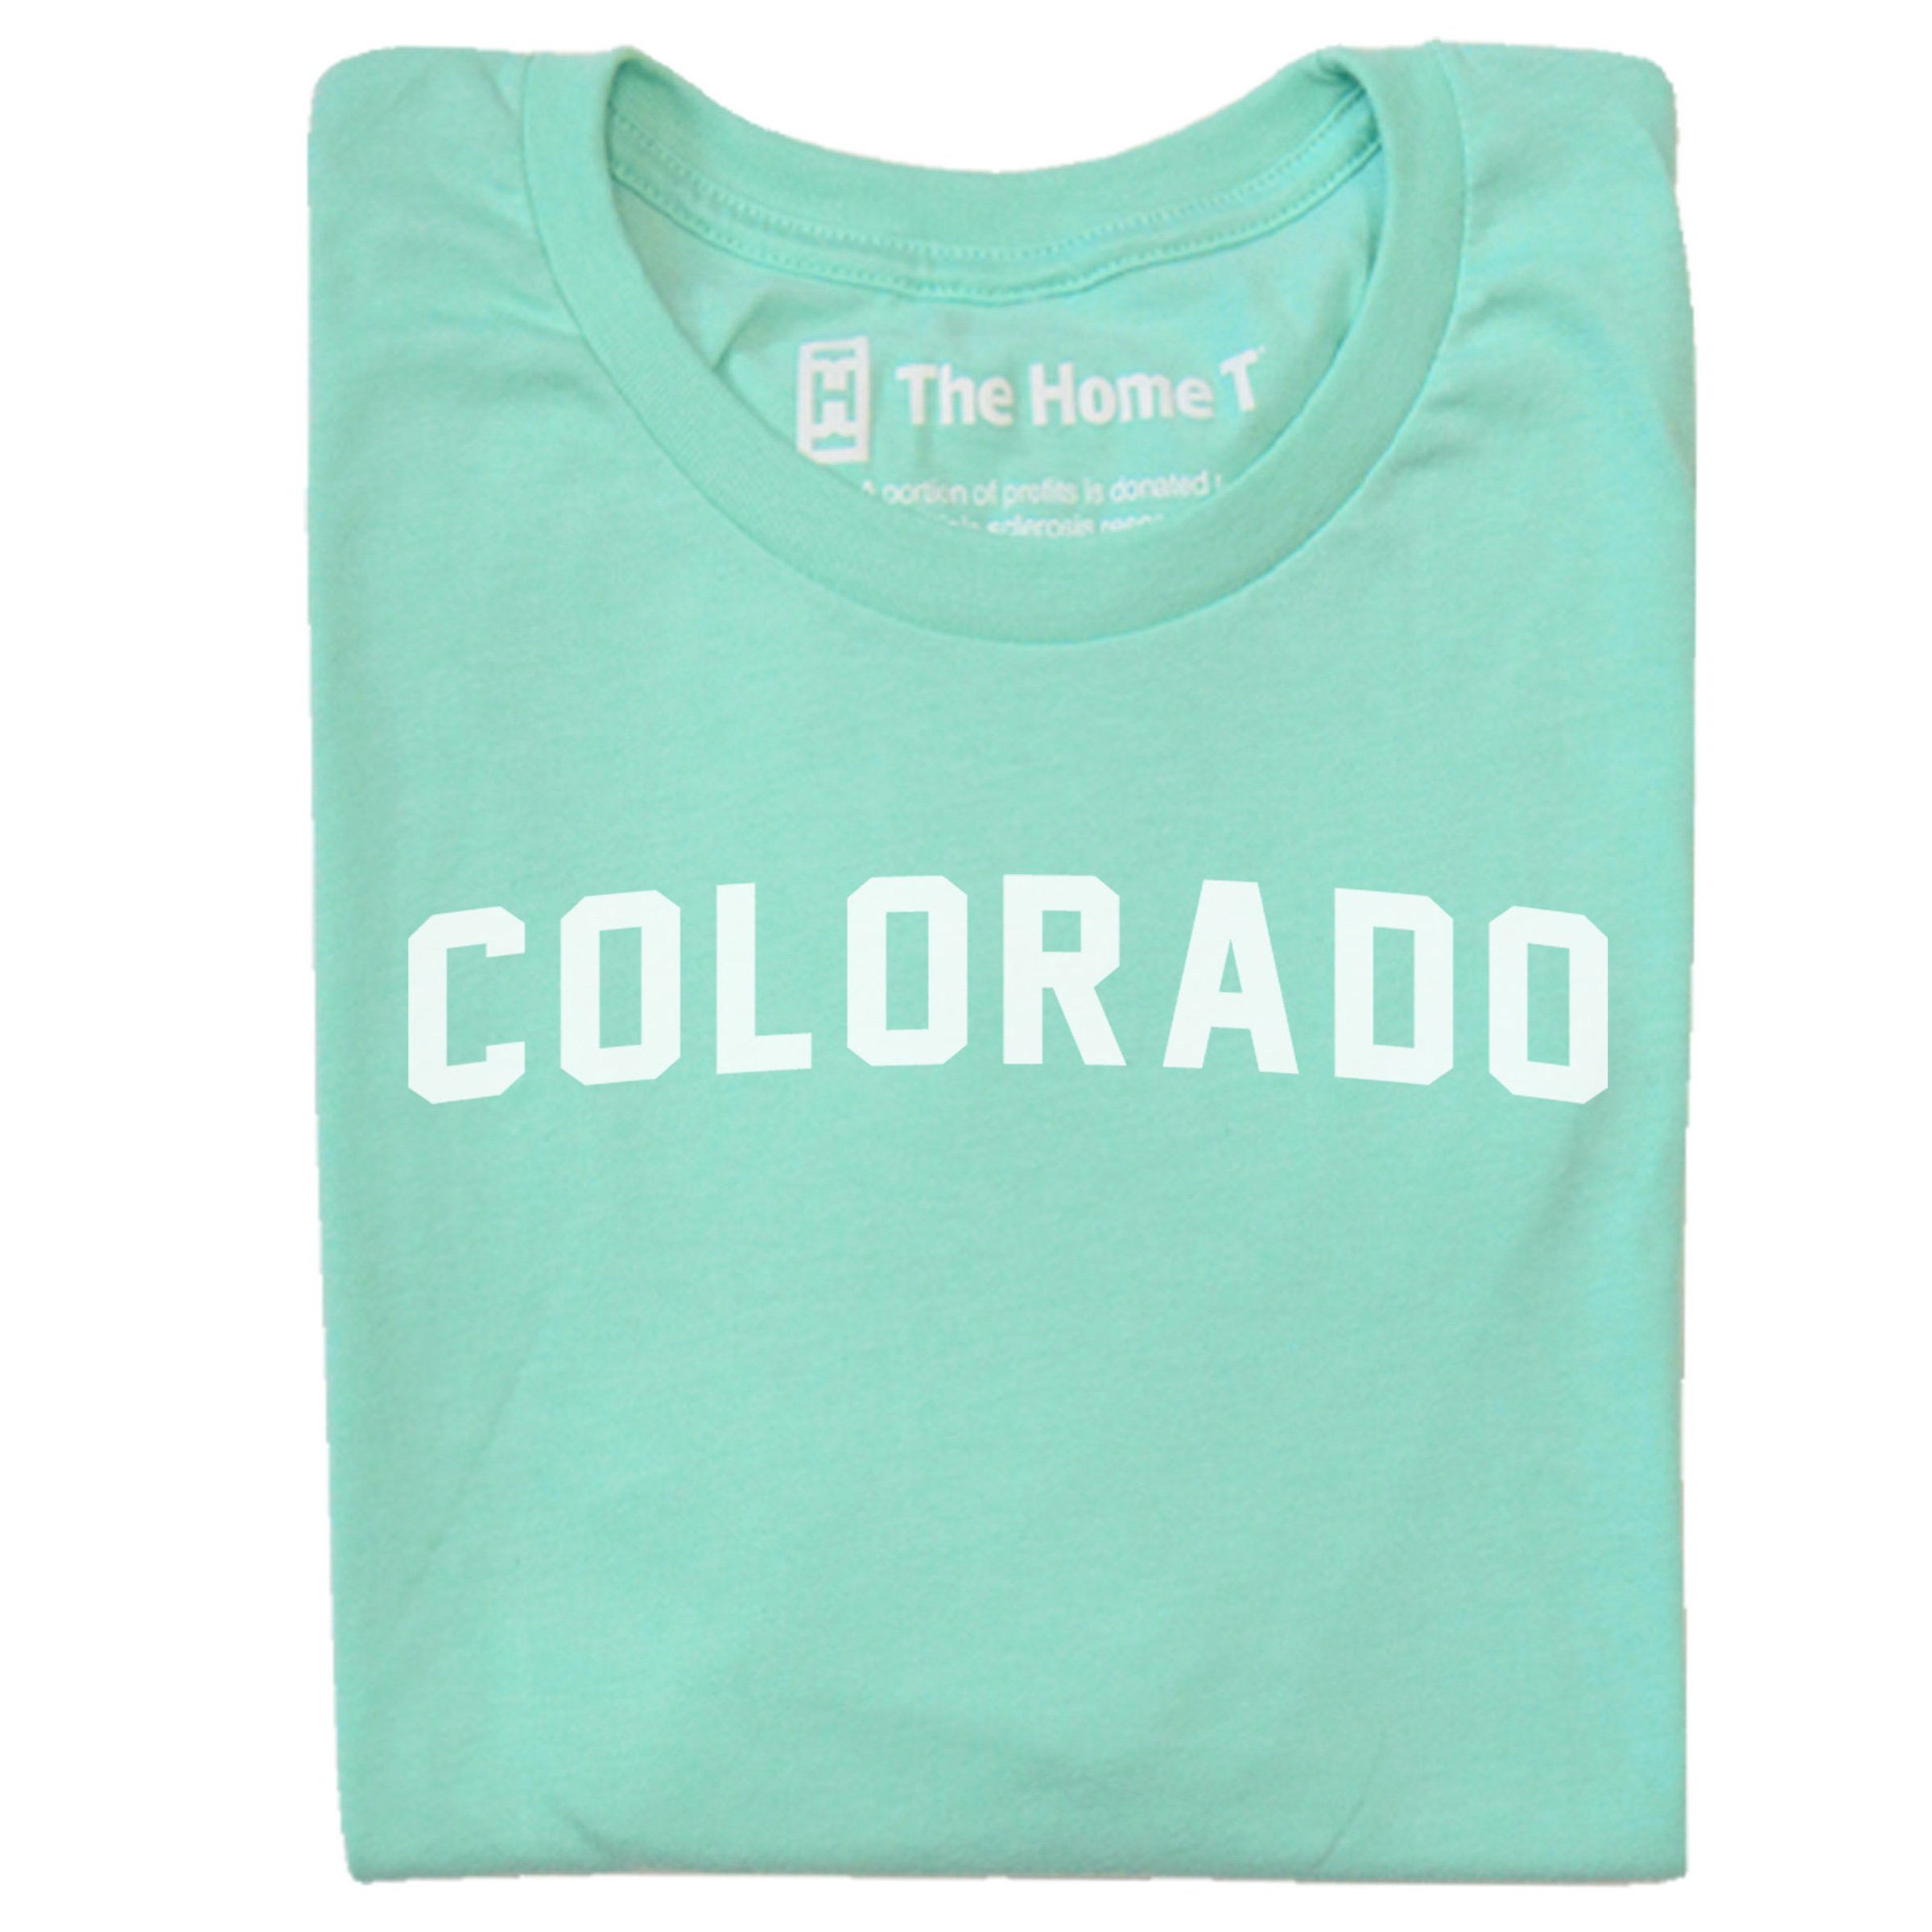 Colorado Arched The Home T XS Mint